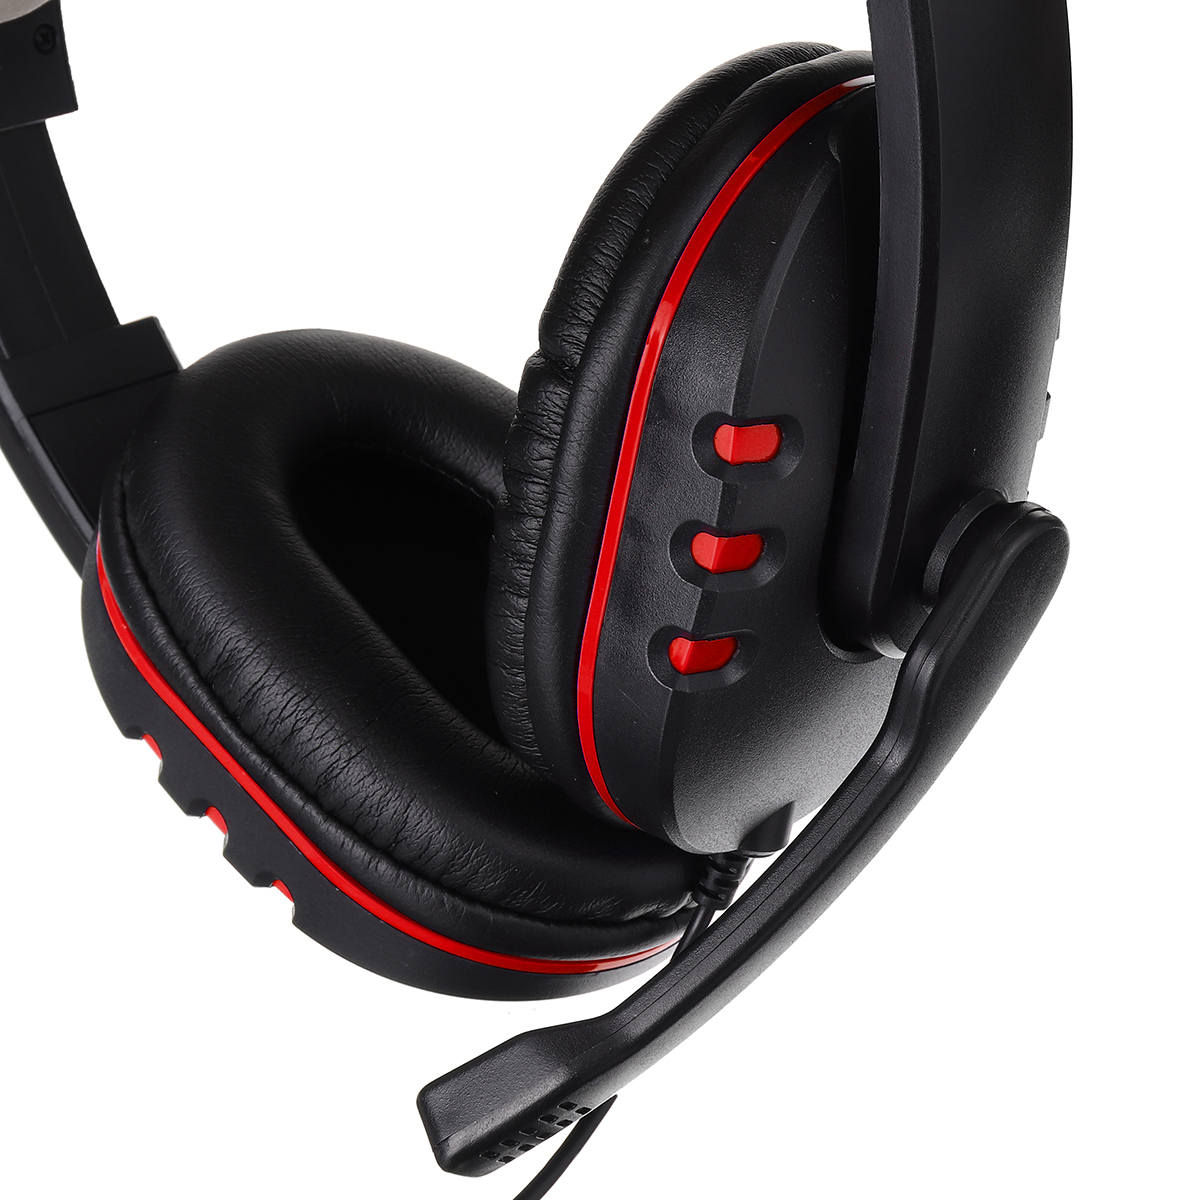 Portable-Gaming-Headset-35mm-Stereo-Surround-Gamer-Wired-Headphone-With-Mic-for-PC-Computer-PS4-Xbox-1699413-6